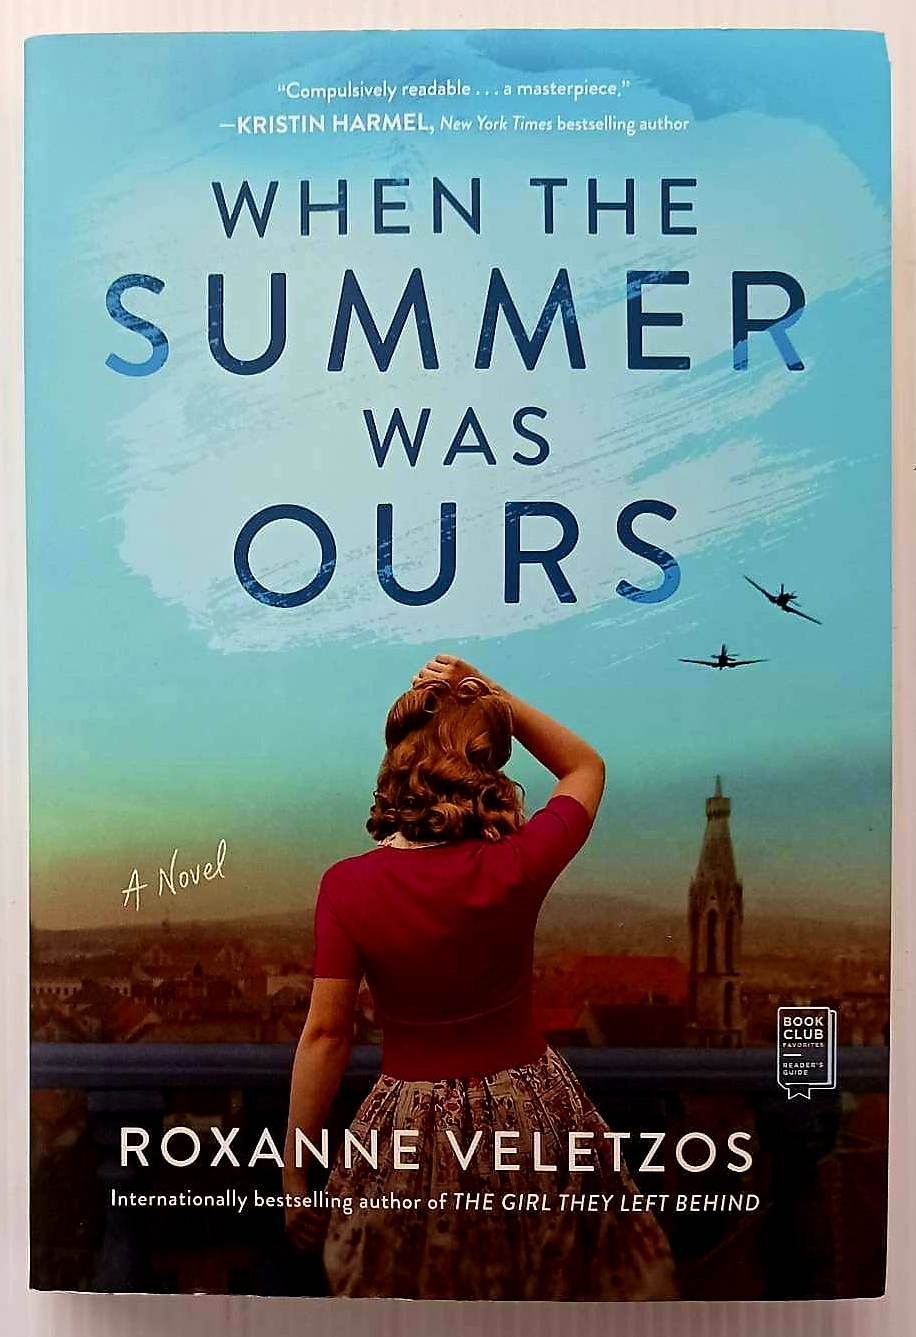 WHEN THE SUMMER WAS OURS - Roxanne Veletzos